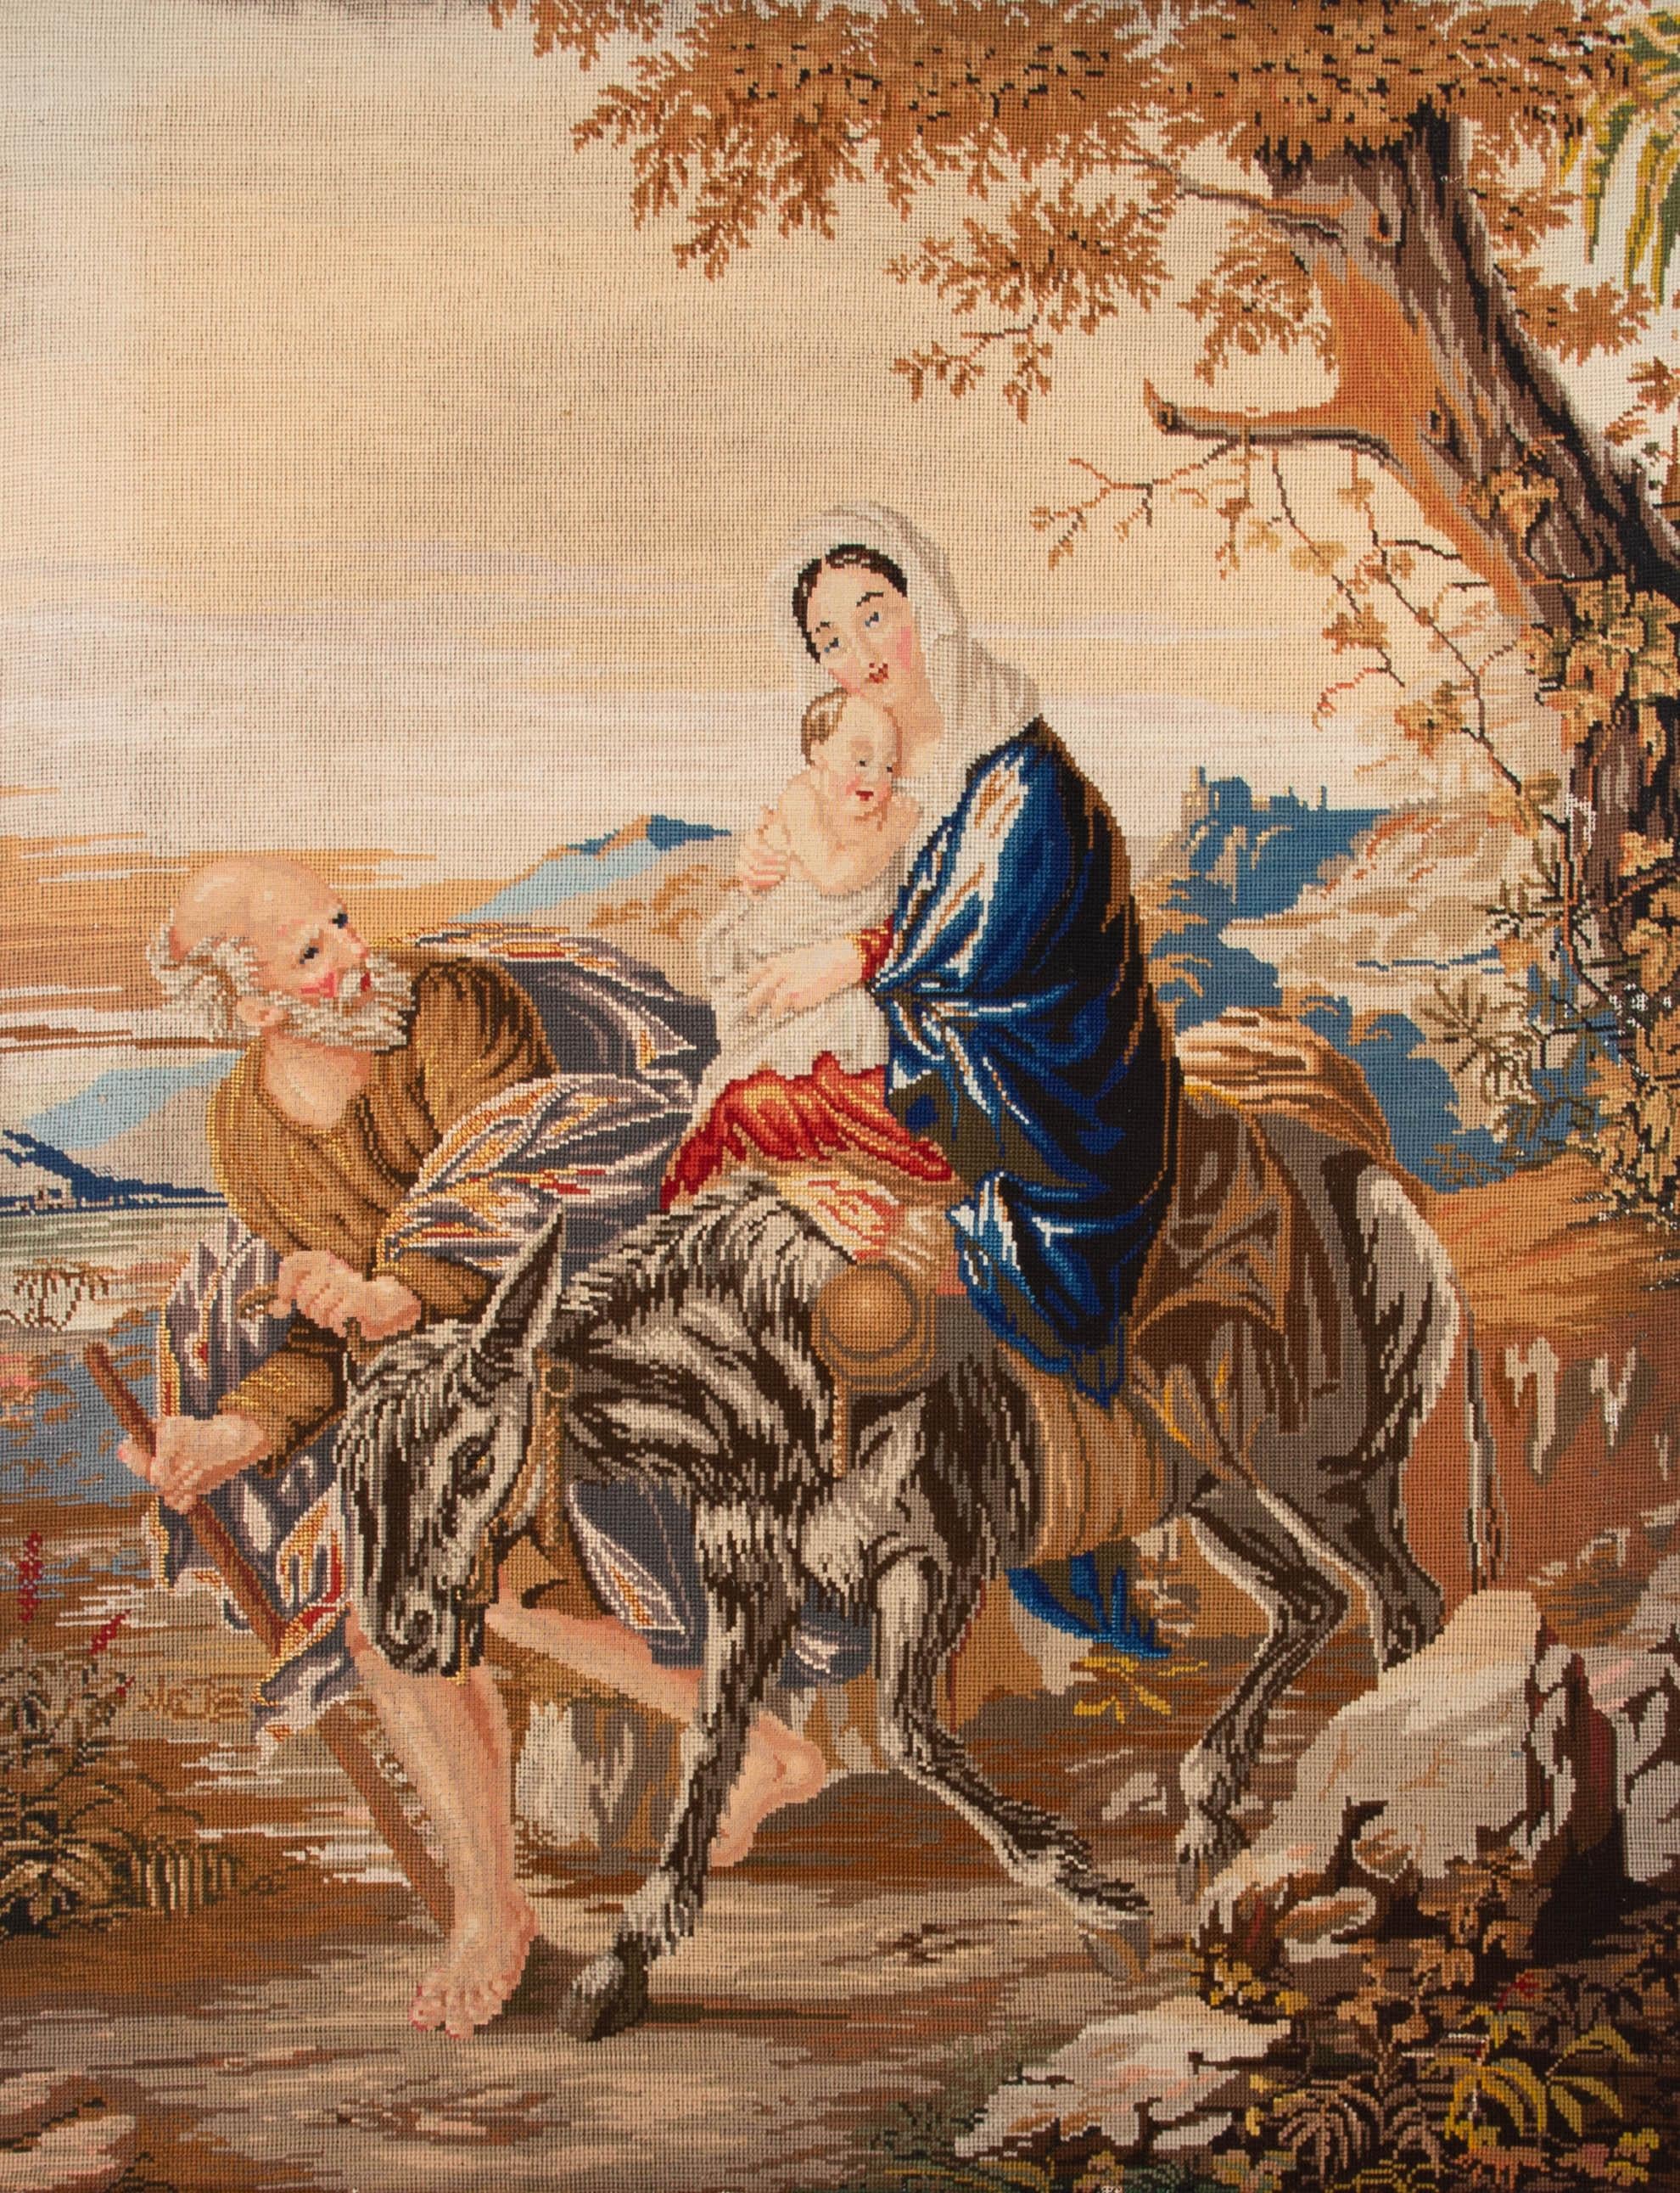 A charming needlepoint picture depicting Mary And Joseph fleeing with the baby Christ to Egypt to escape King Herod. On cotton on stretchers .

